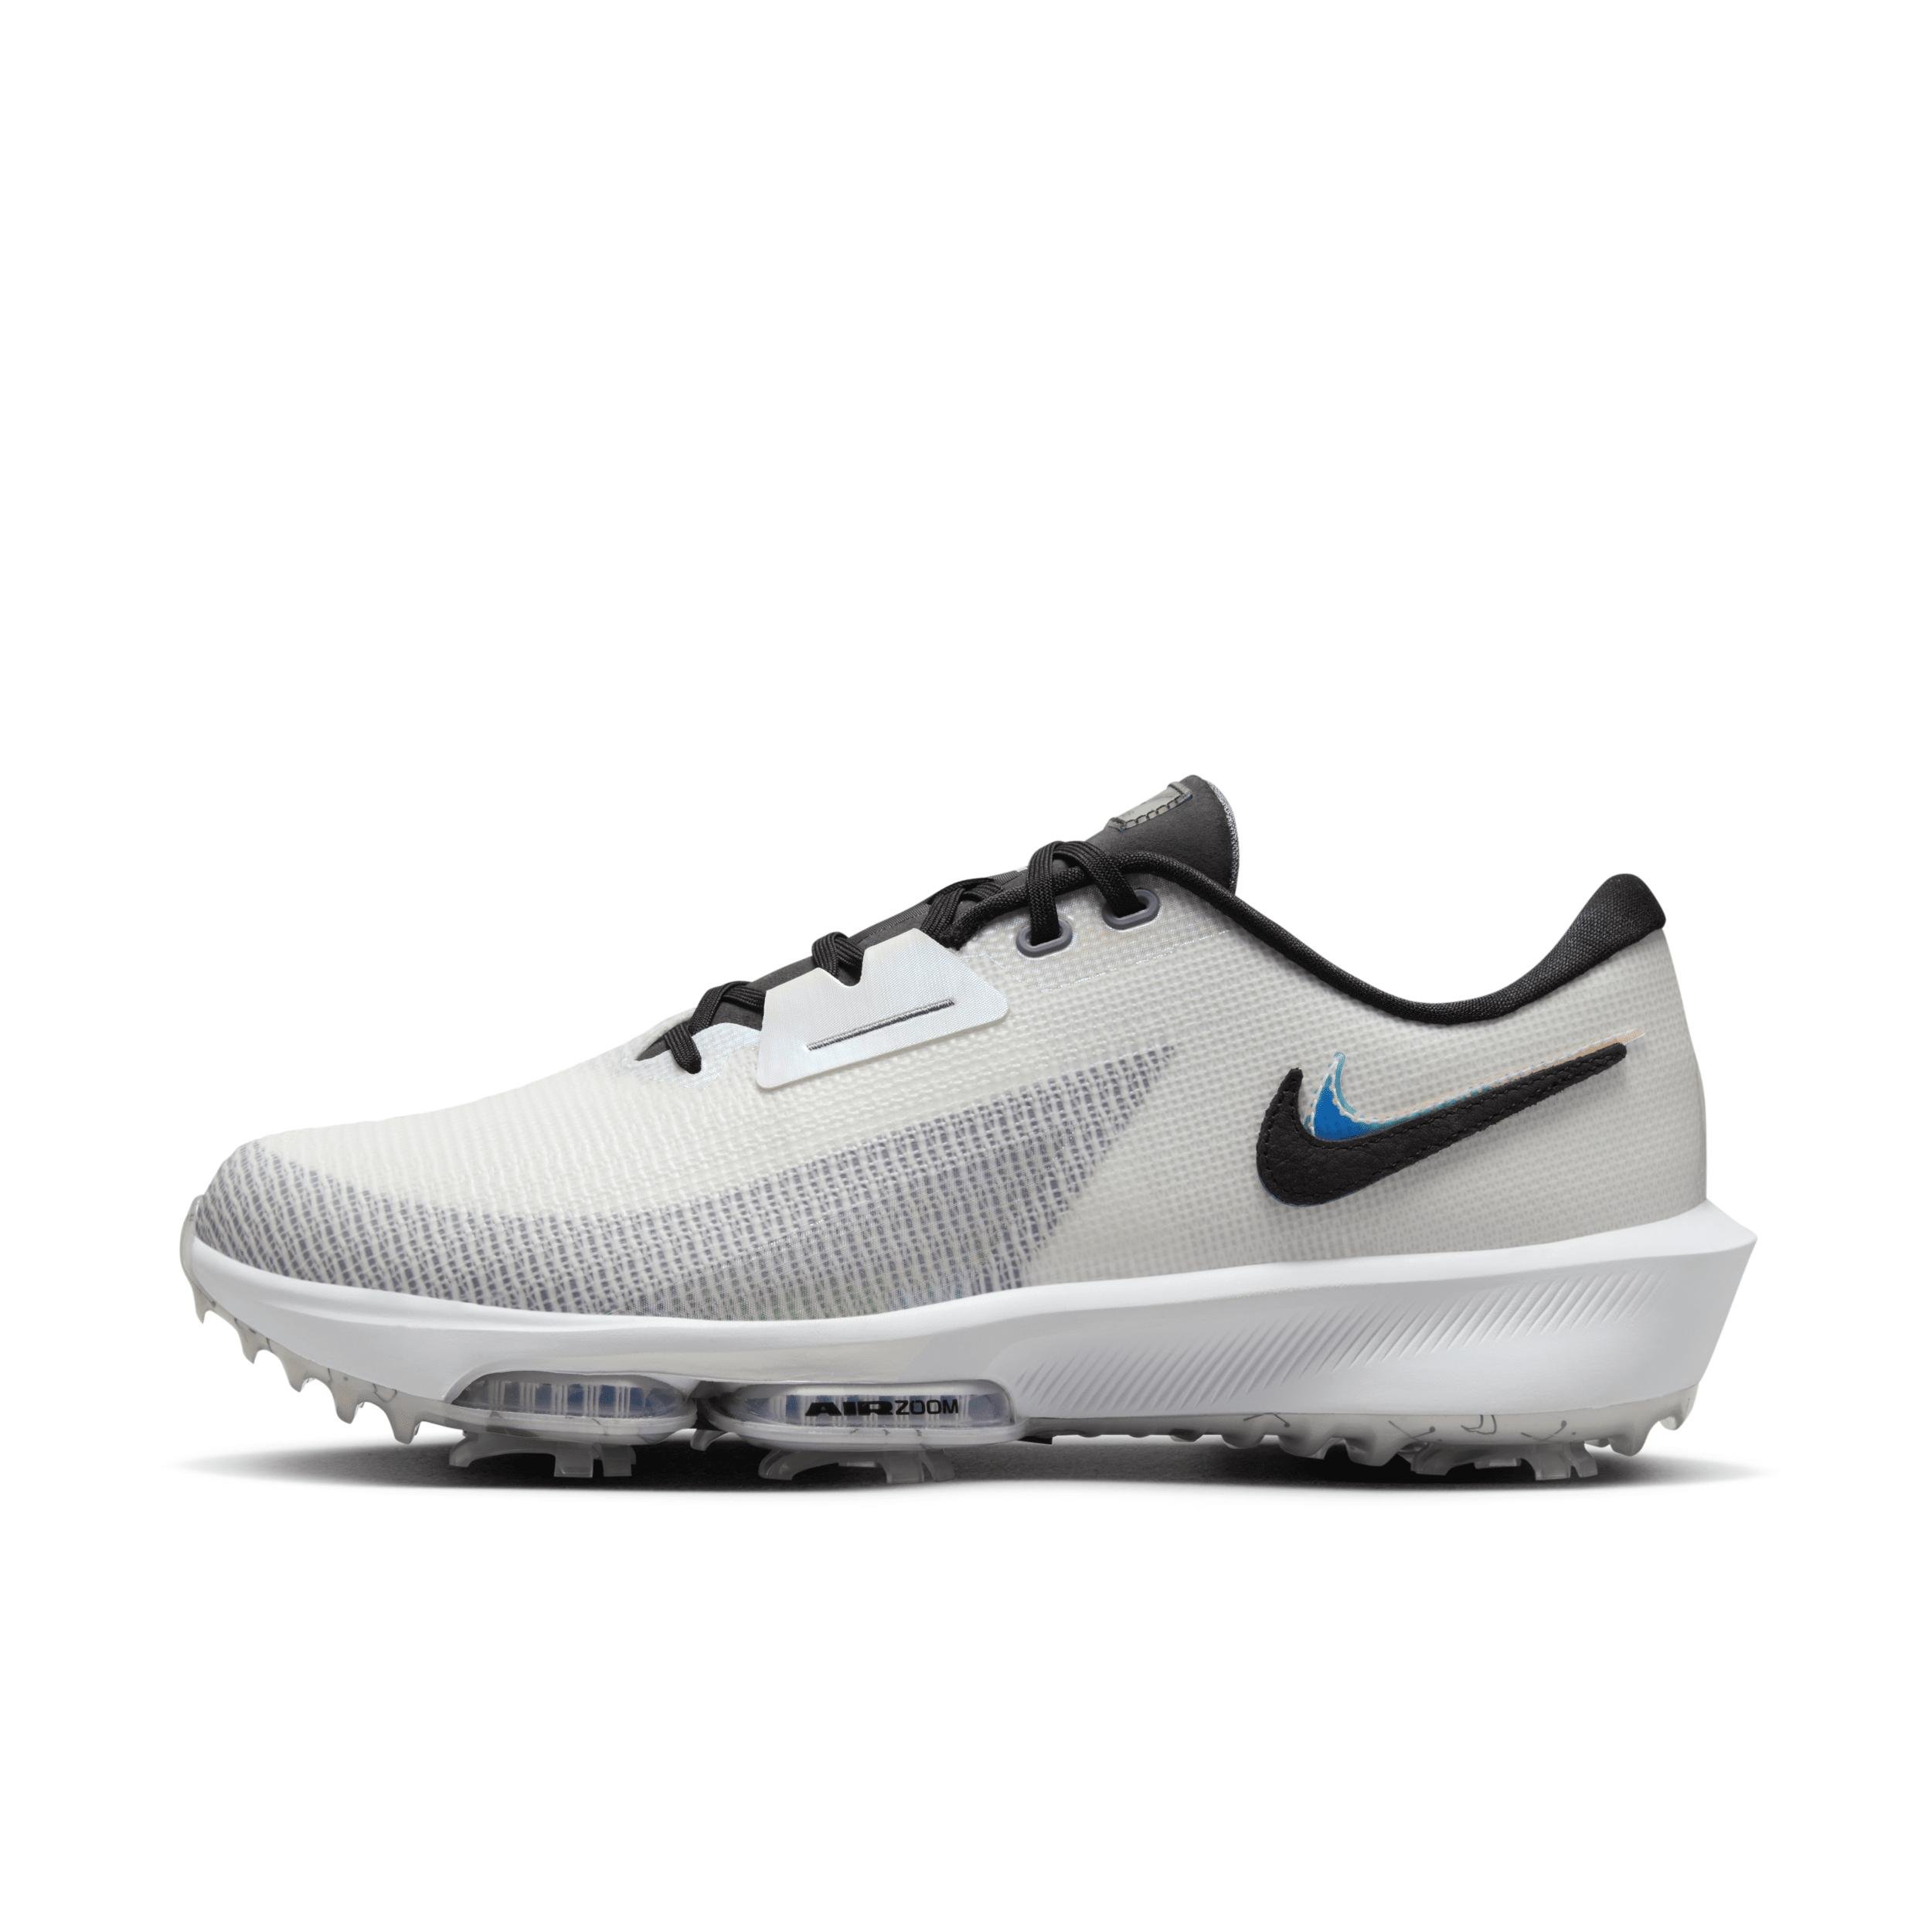 Nike Men's Air Zoom Infinity Tour NRG Golf Shoes by NIKE